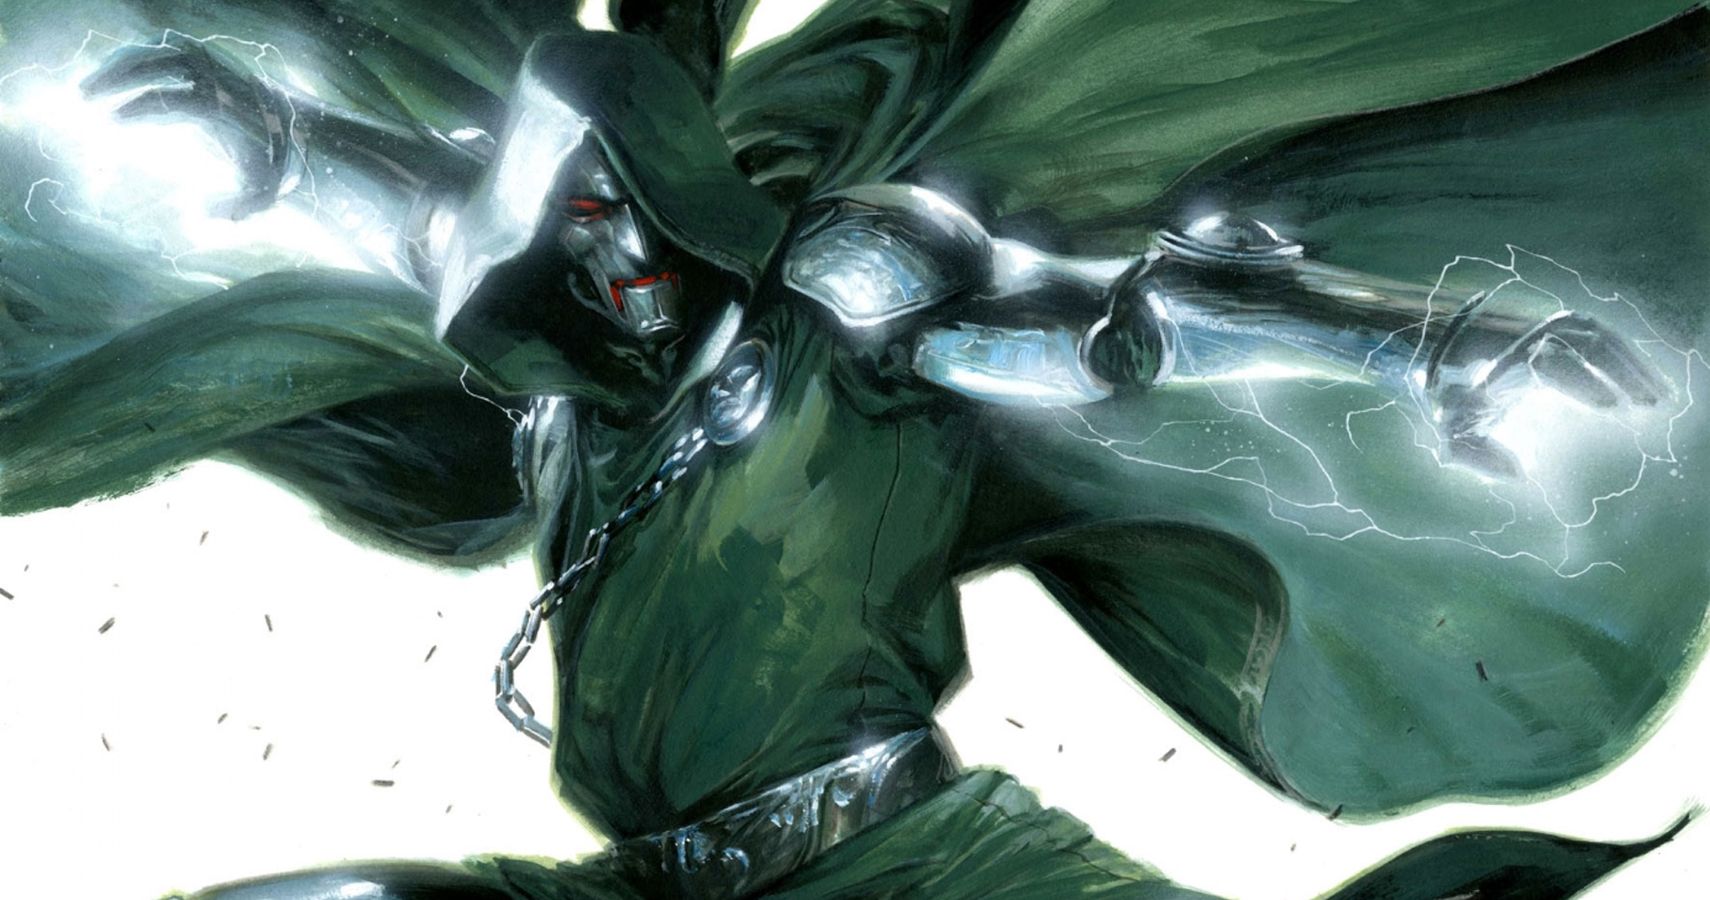 10 Marvel Villains Who Need Their Own Movies